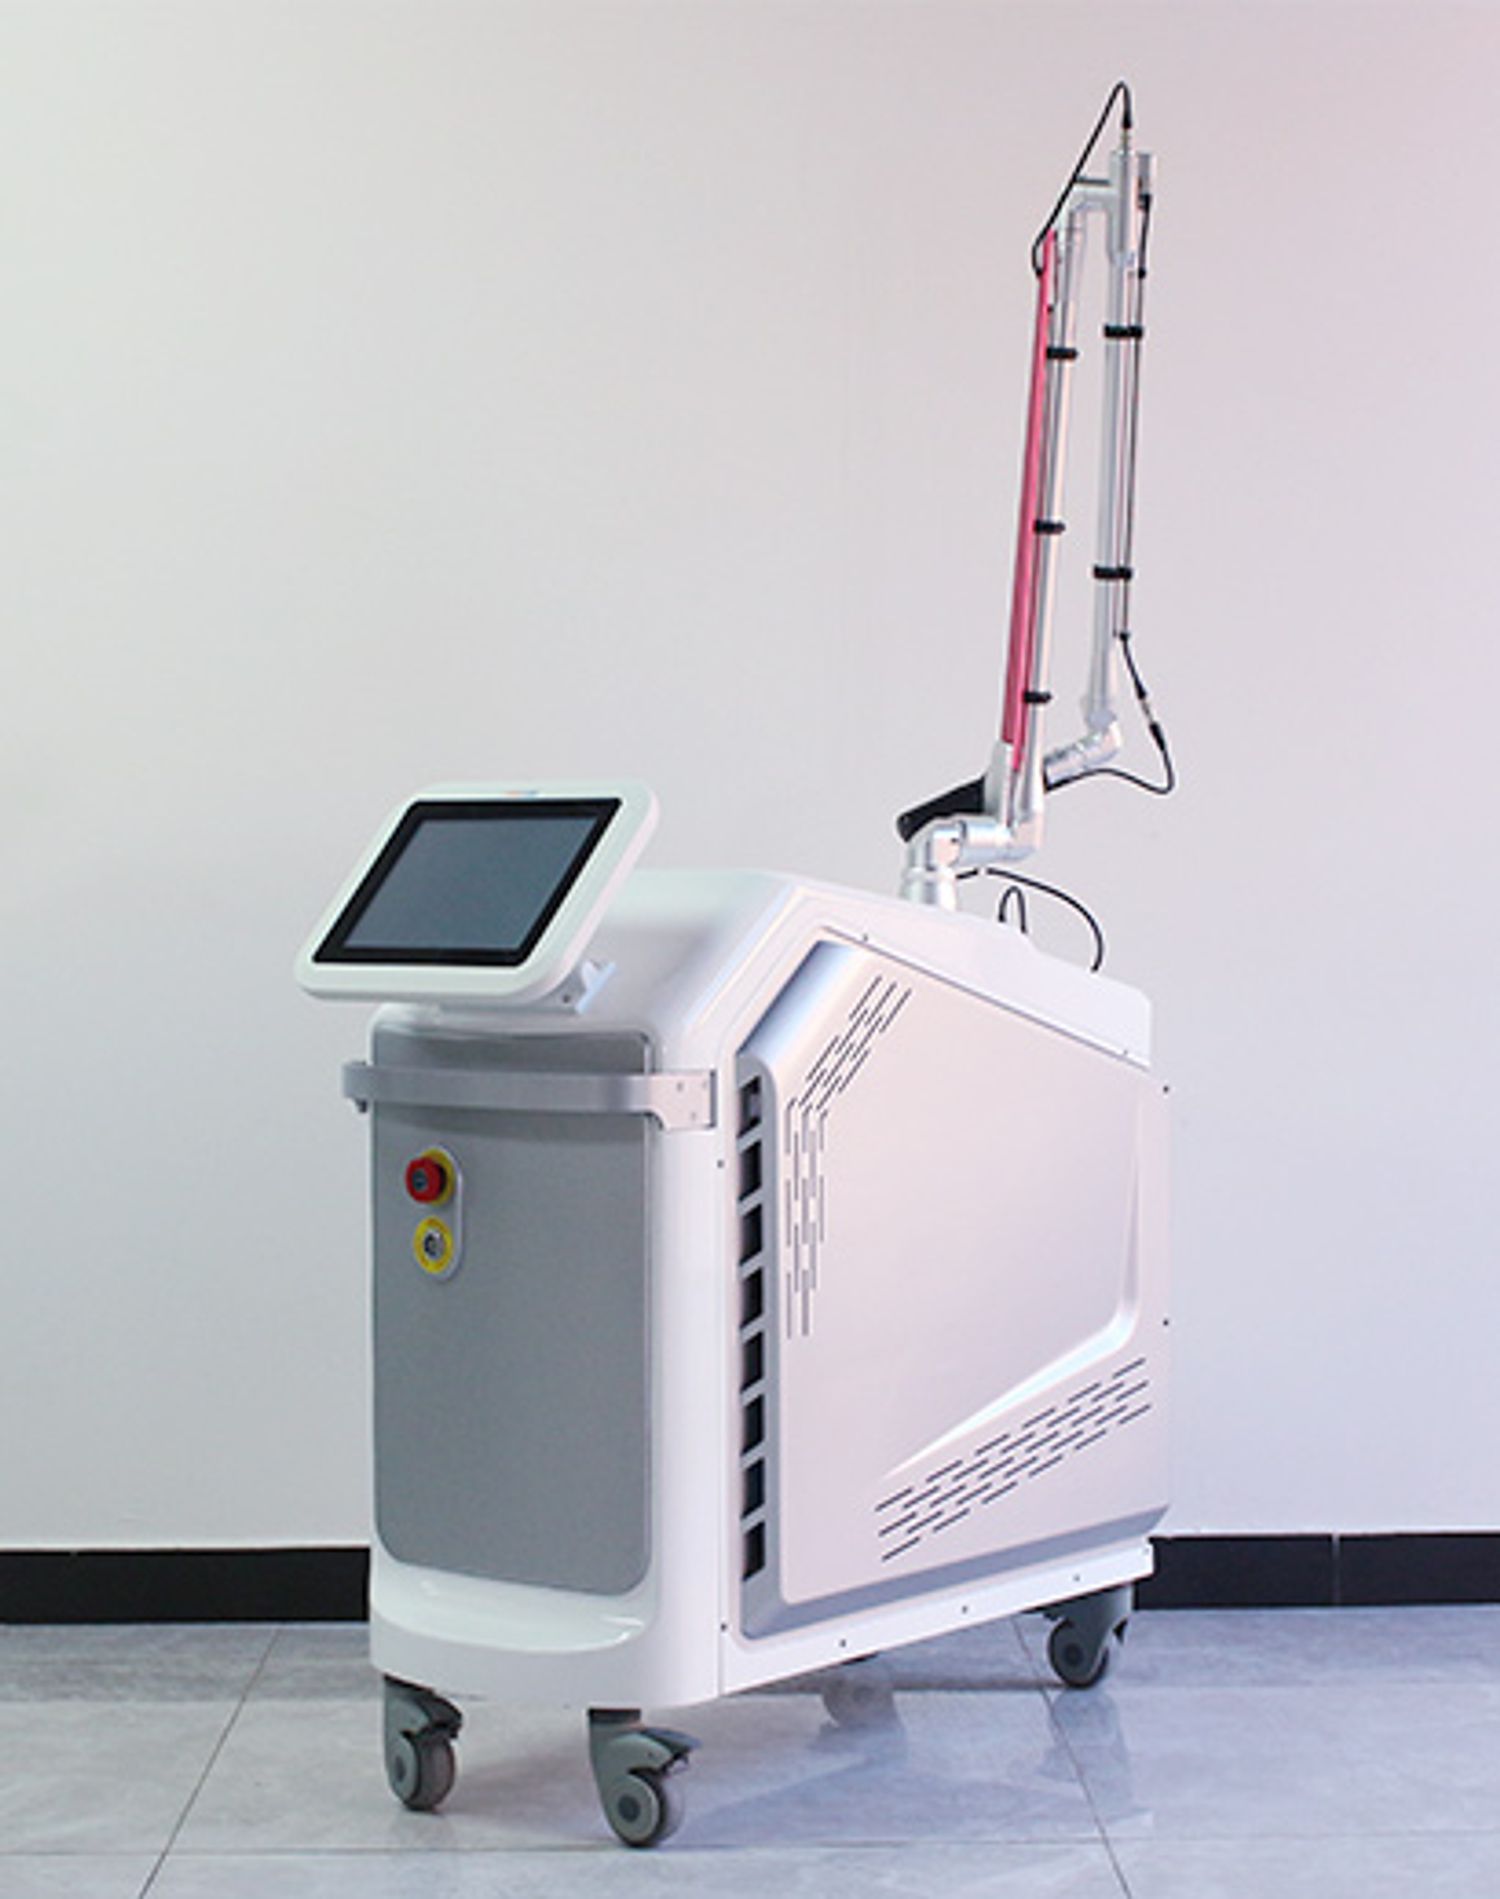 Full view of Jontelaser Q-Switch ND Yag Laser Tattoo Removal Machine in a clinical setting